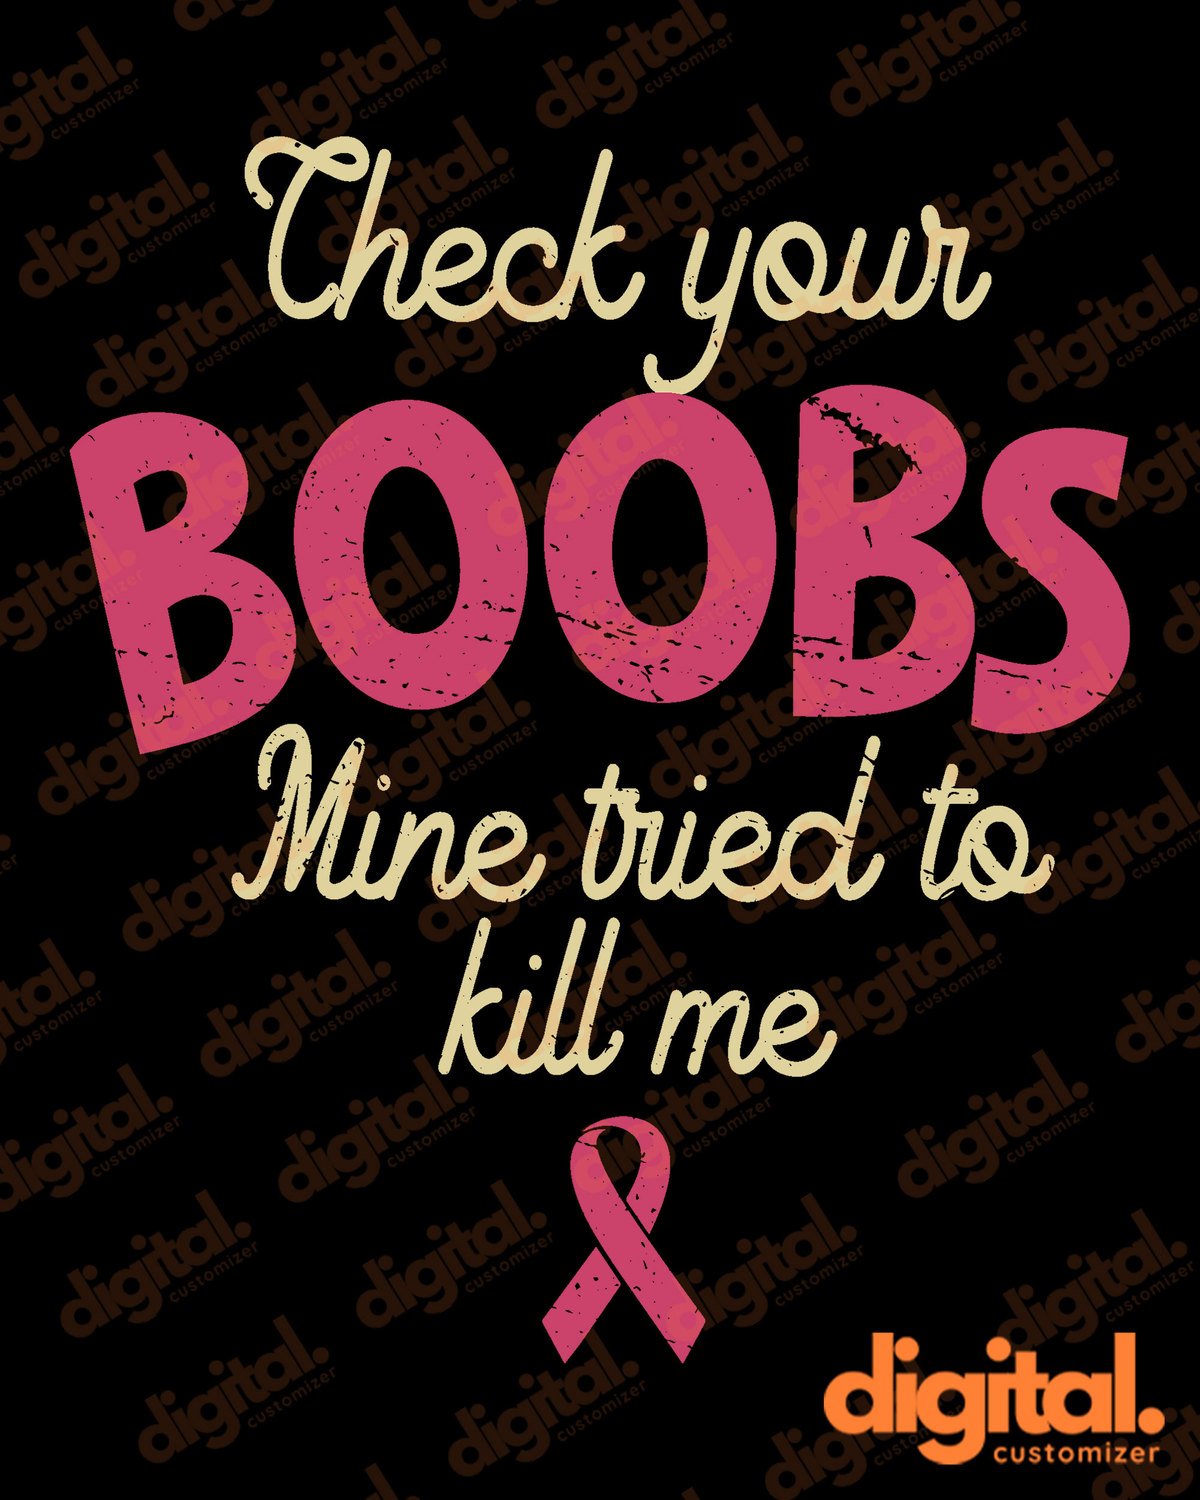 Check Your Boobs Mine Tried To Kill Me Breast Cancer Awareness T-shirt Sweatshirt Hoodie